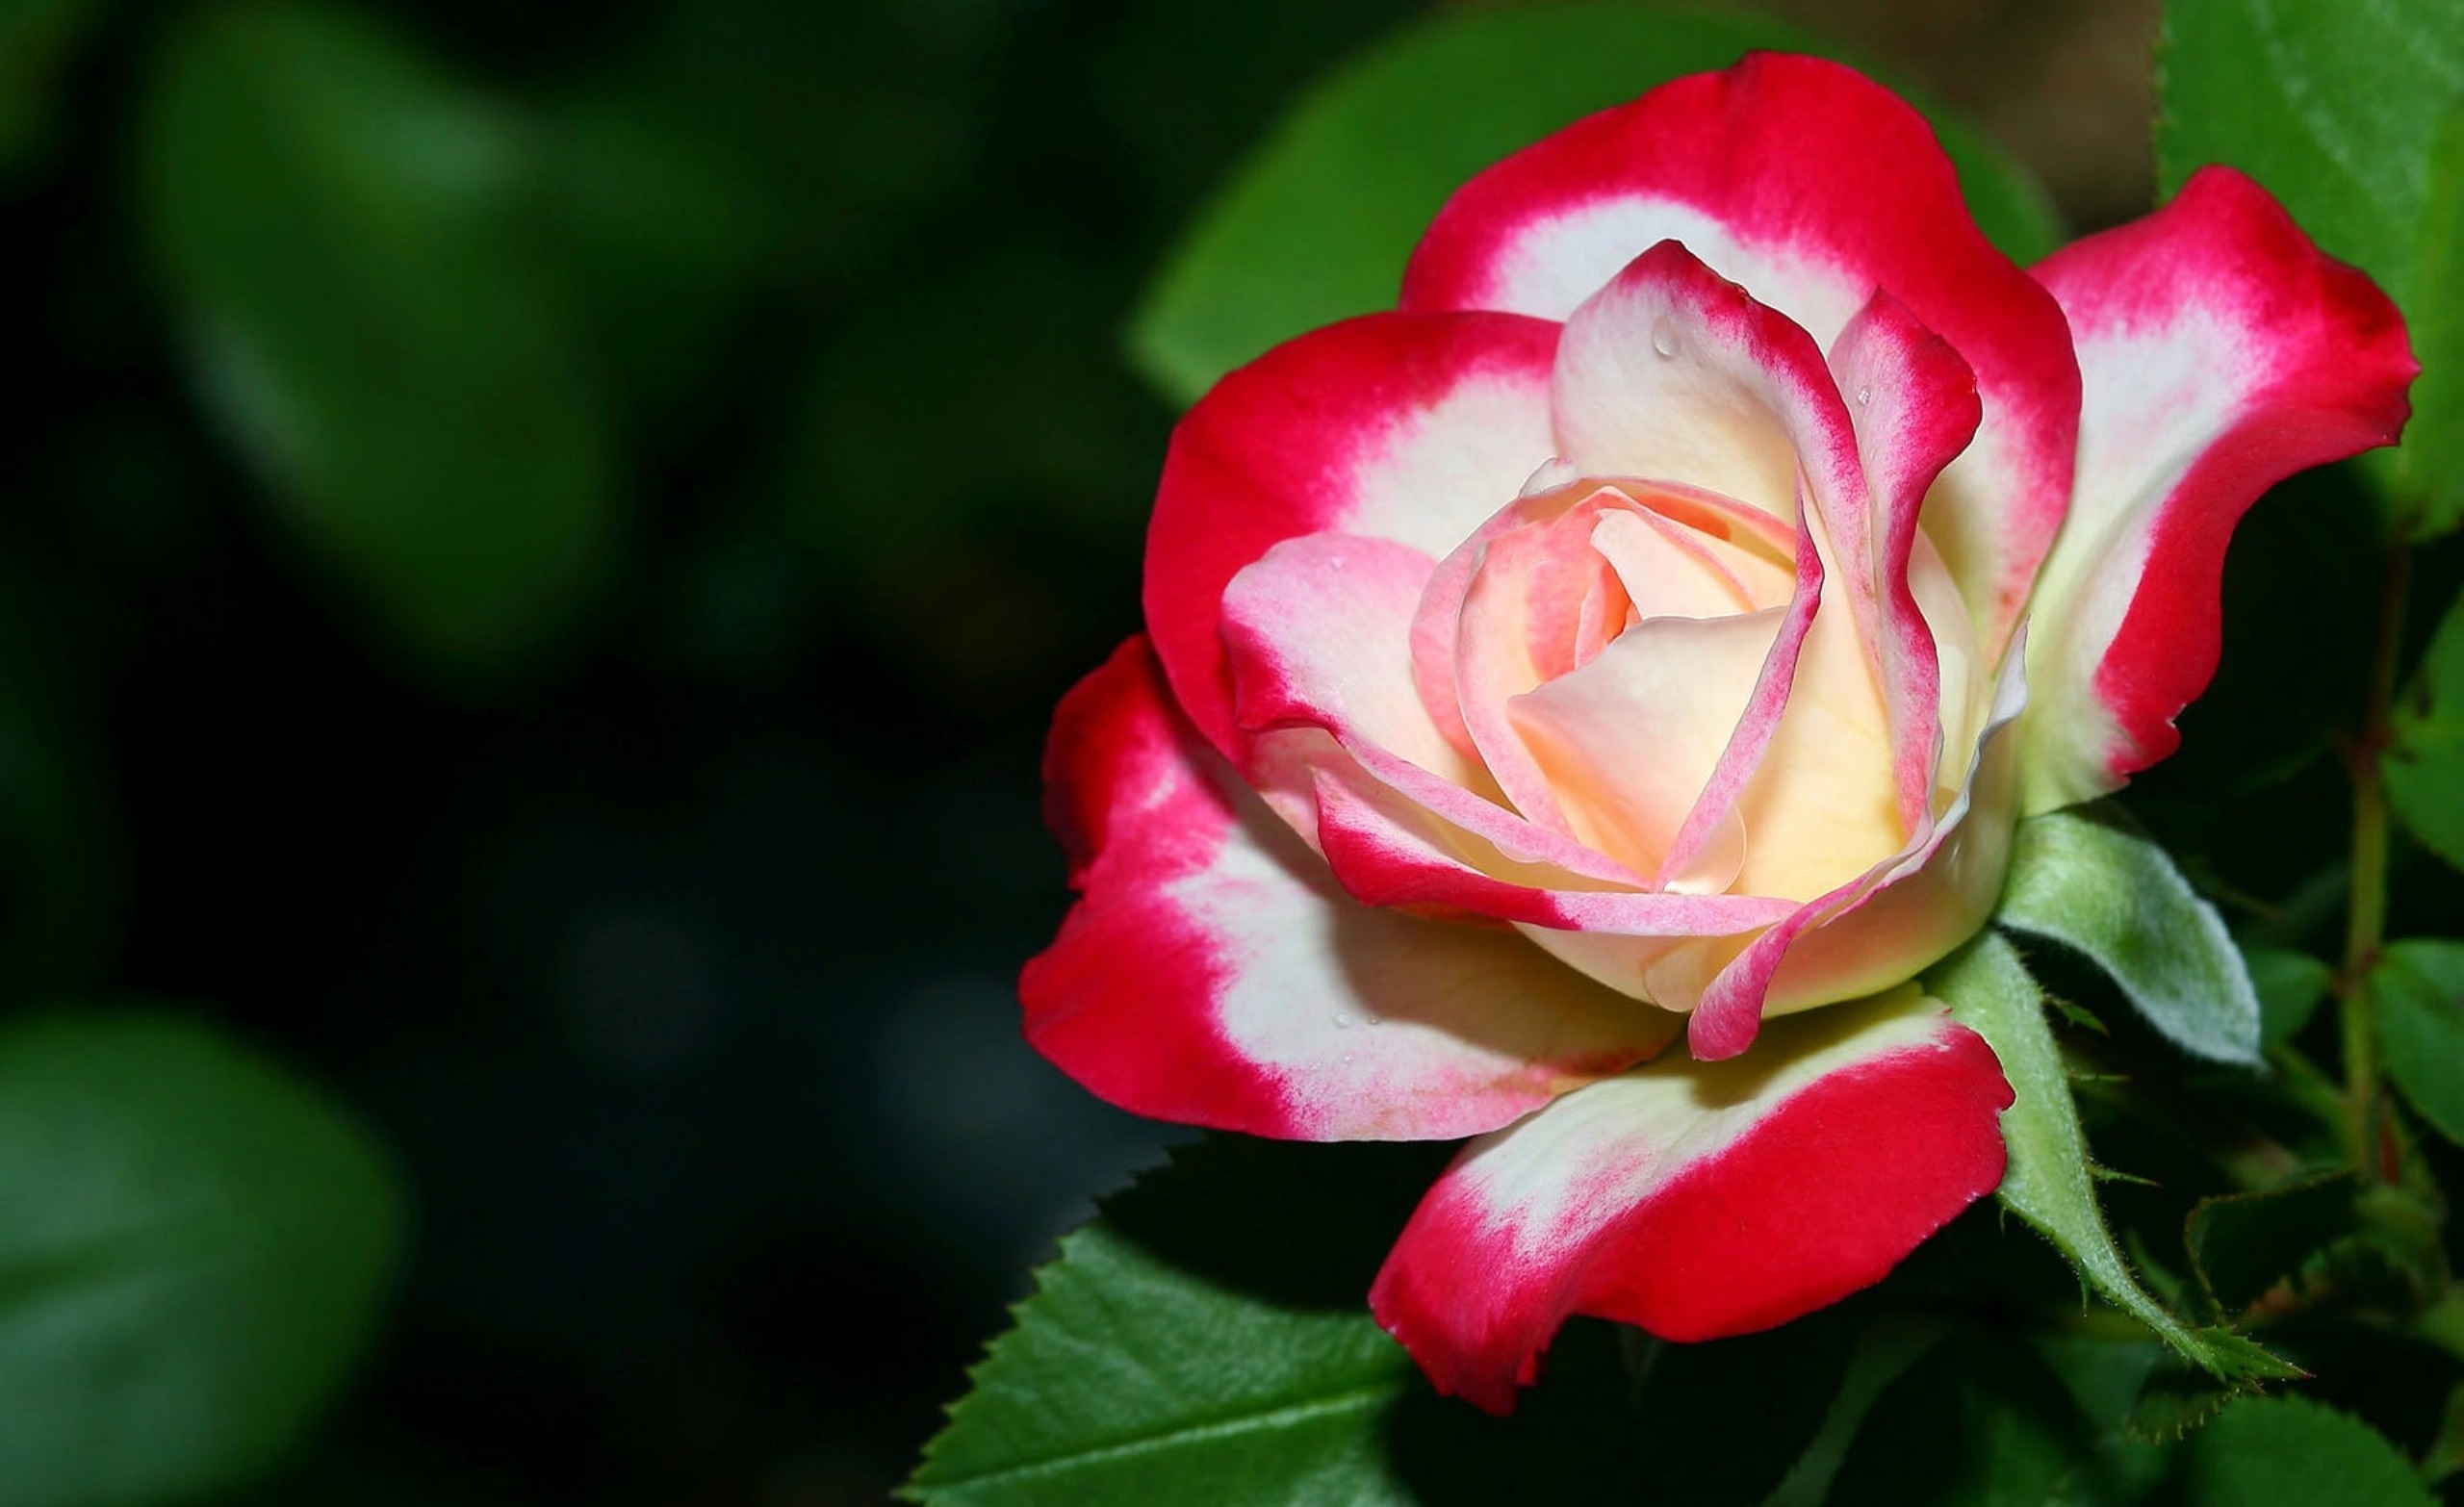 Desktop Red And White Rose Flower Images Wallpaper - Most Beautiful Flowers Roses - HD Wallpaper 